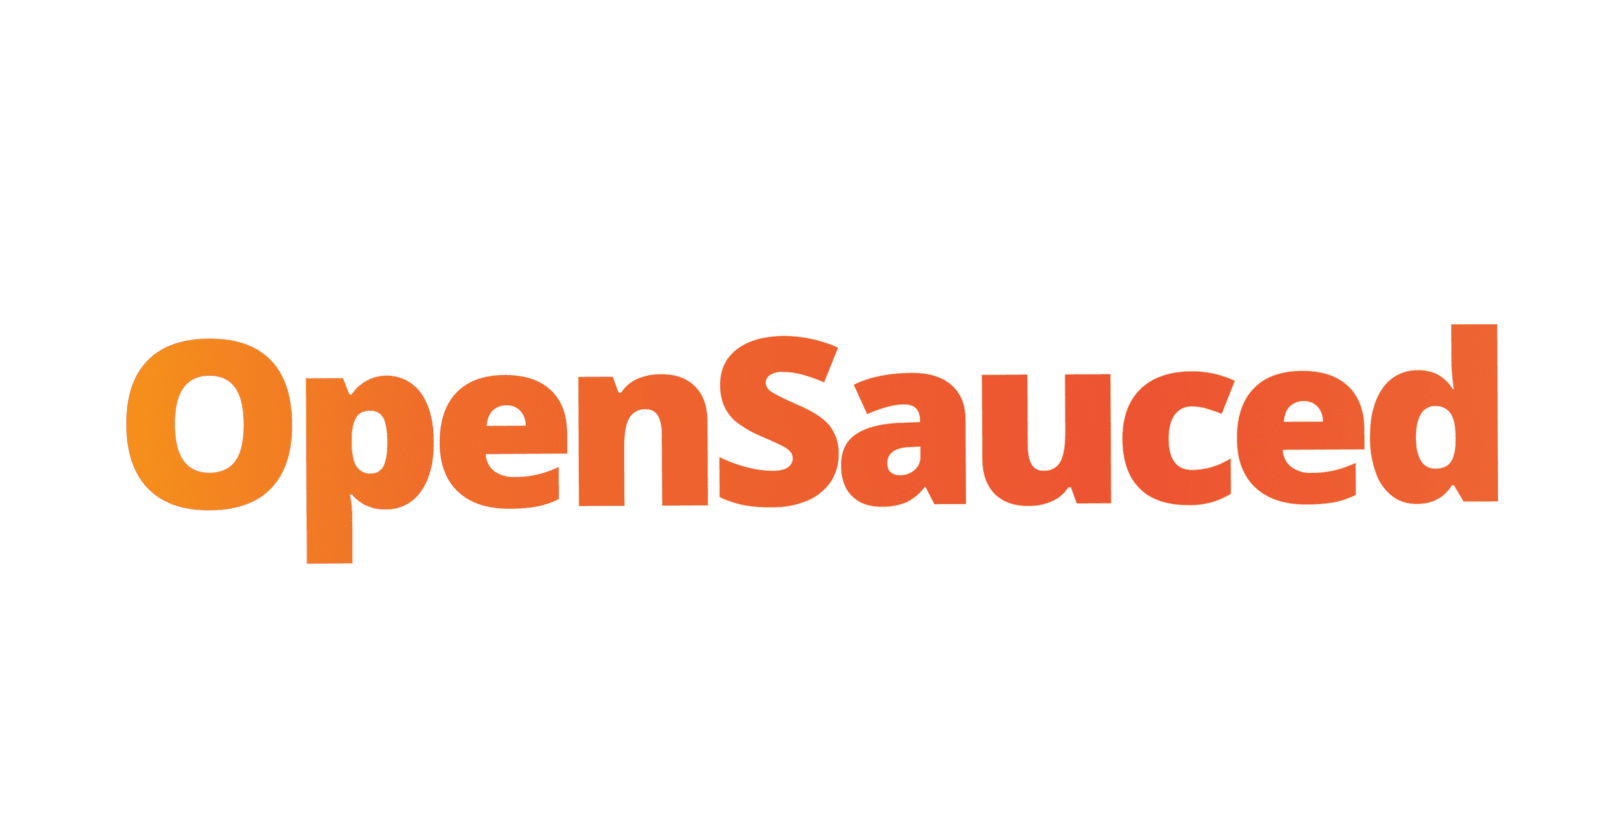 OpenSauced: Transforming the open source landscape